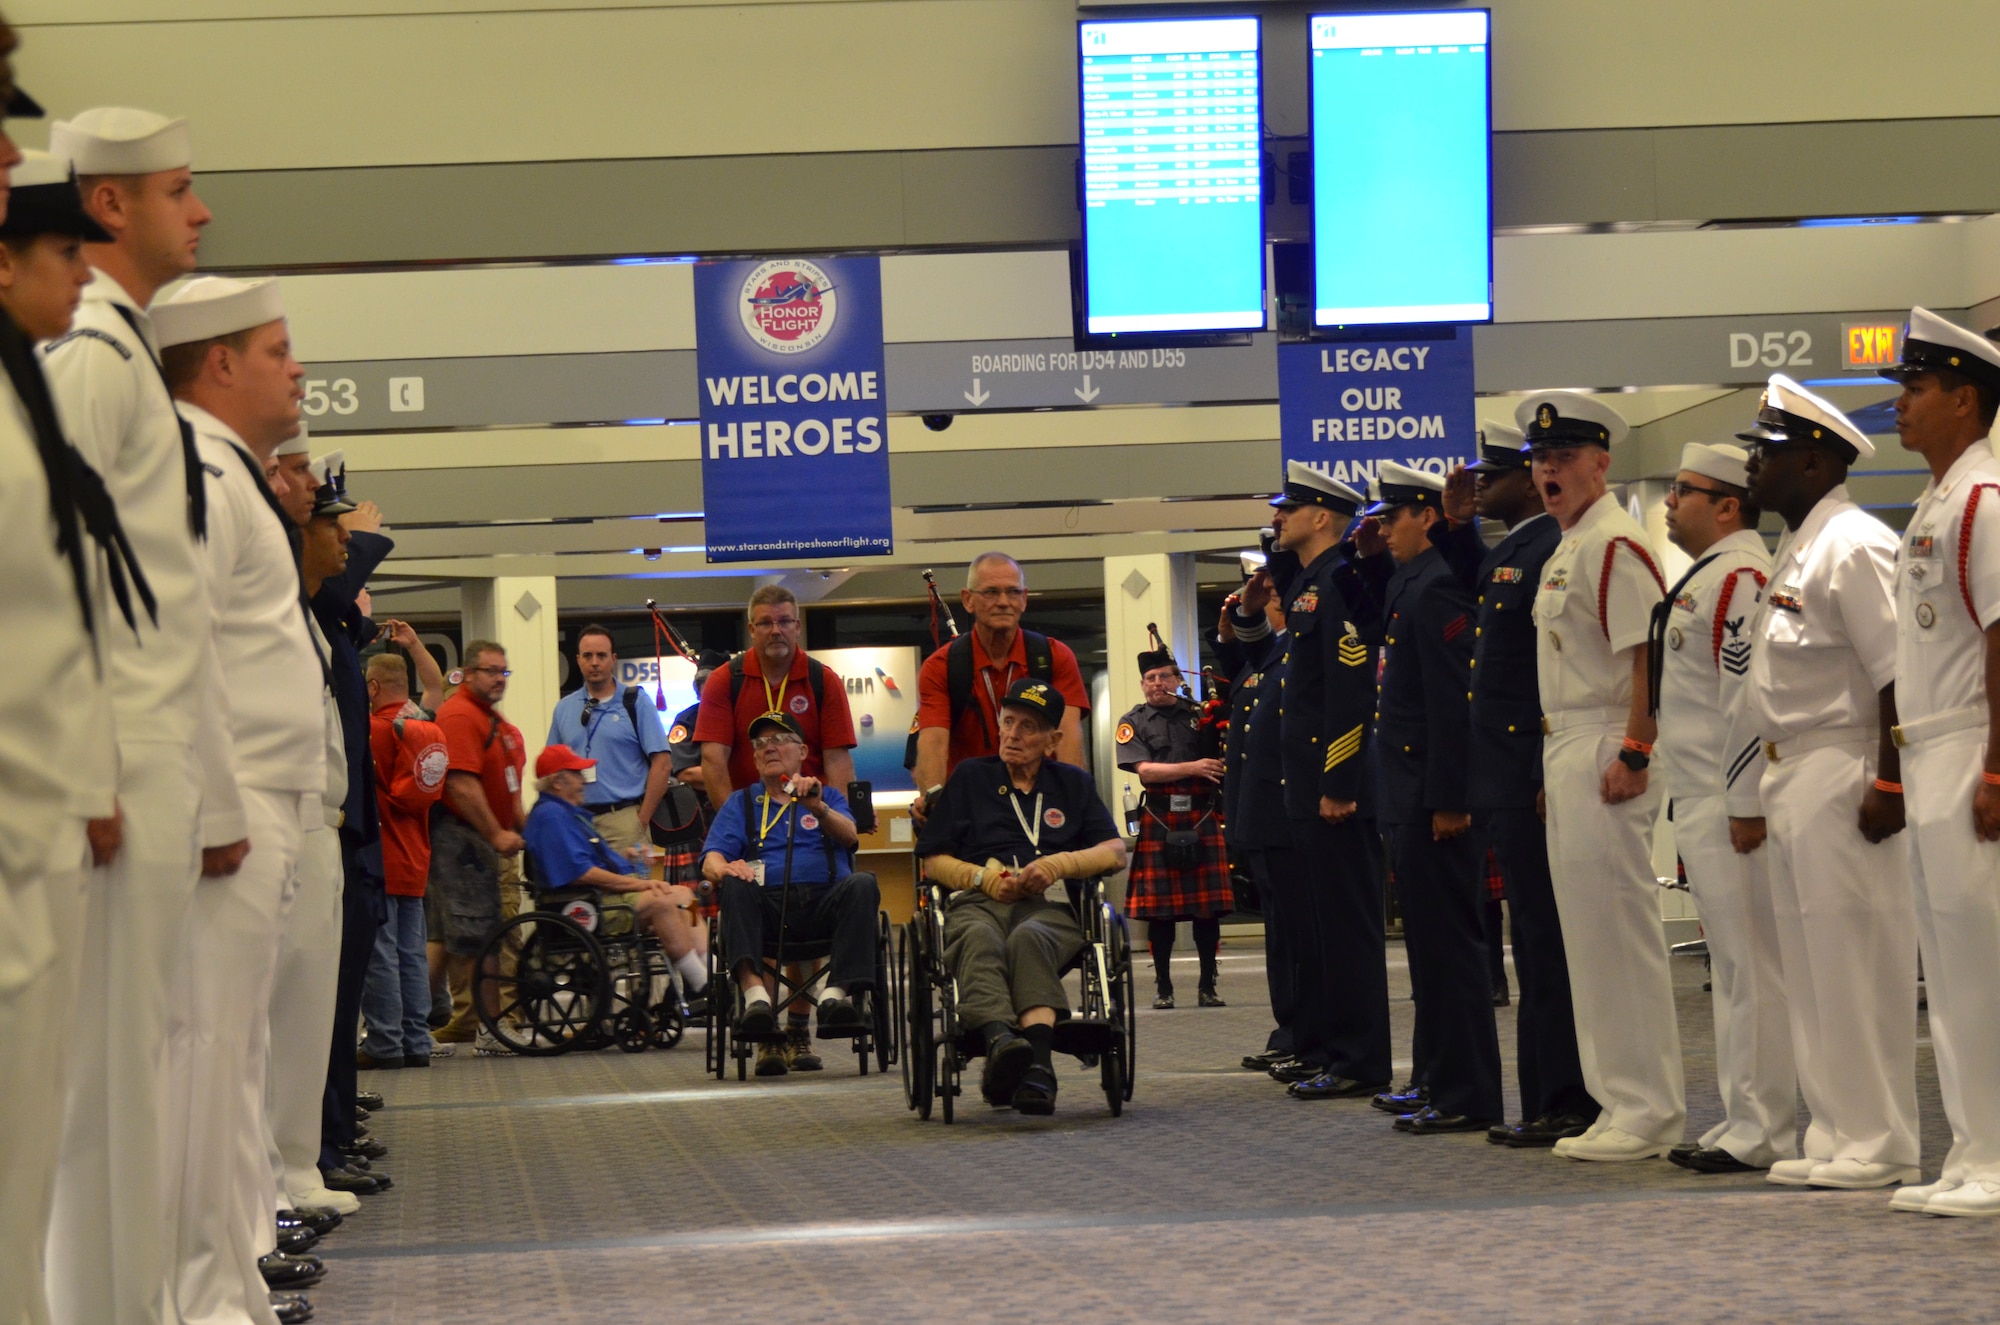 Recalling memories and making new ones: Stars and Stripes Honor Flight makes a big impact on participants and volunteers Sept. 17, 2016 at General Billy Mitchell International Airport, Milwaukee, Wisconsin. Several Airmen with the128th Air Refueling Wing joined other veteran participants, volunteers, family members and friends in the emotional evening, as approximately 600 volunteers participated in the Welcome Home Ceremony. (U.S. Air National Guard photo by Tech. Sgt. Meghan Skrepenski, 128th Air Refueling Wing Public Affairs) 